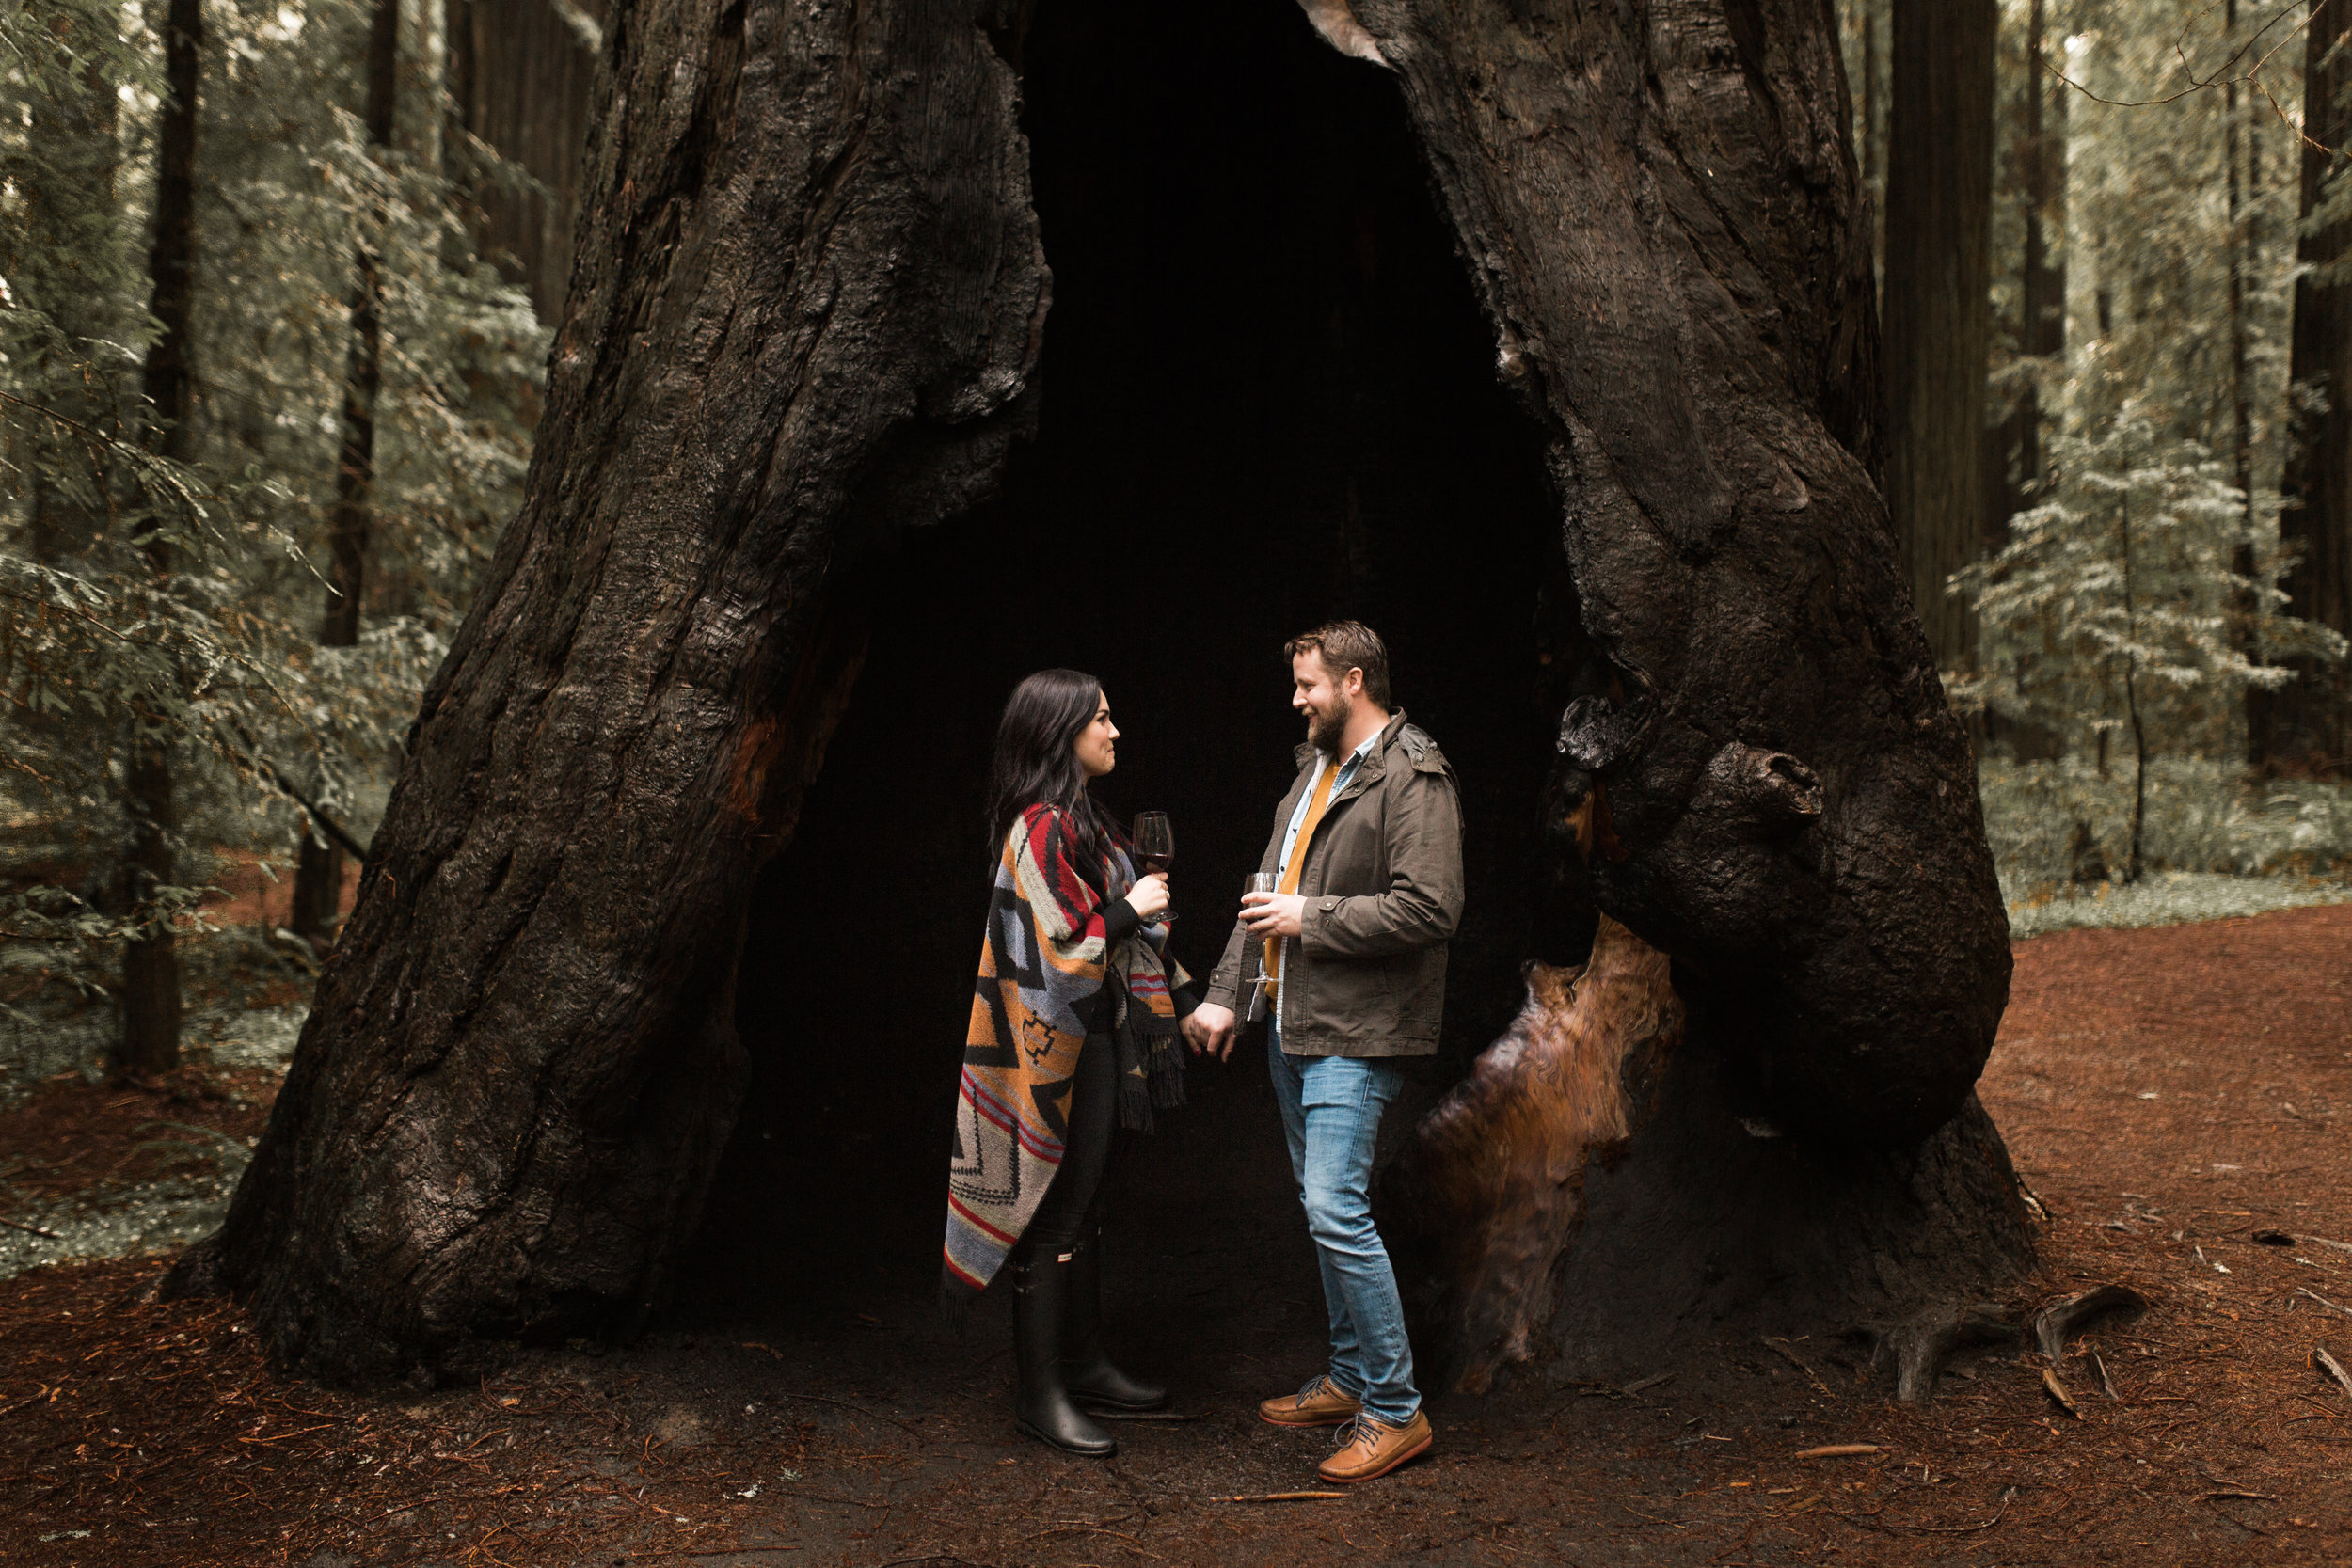 nicole-daacke-photography-redwoods-national-park-forest-rainy-foggy-adventure-engagement-session-humboldt-county-old-growth-redwood-tree-elopement-intimate-wedding-photographer-6.jpg